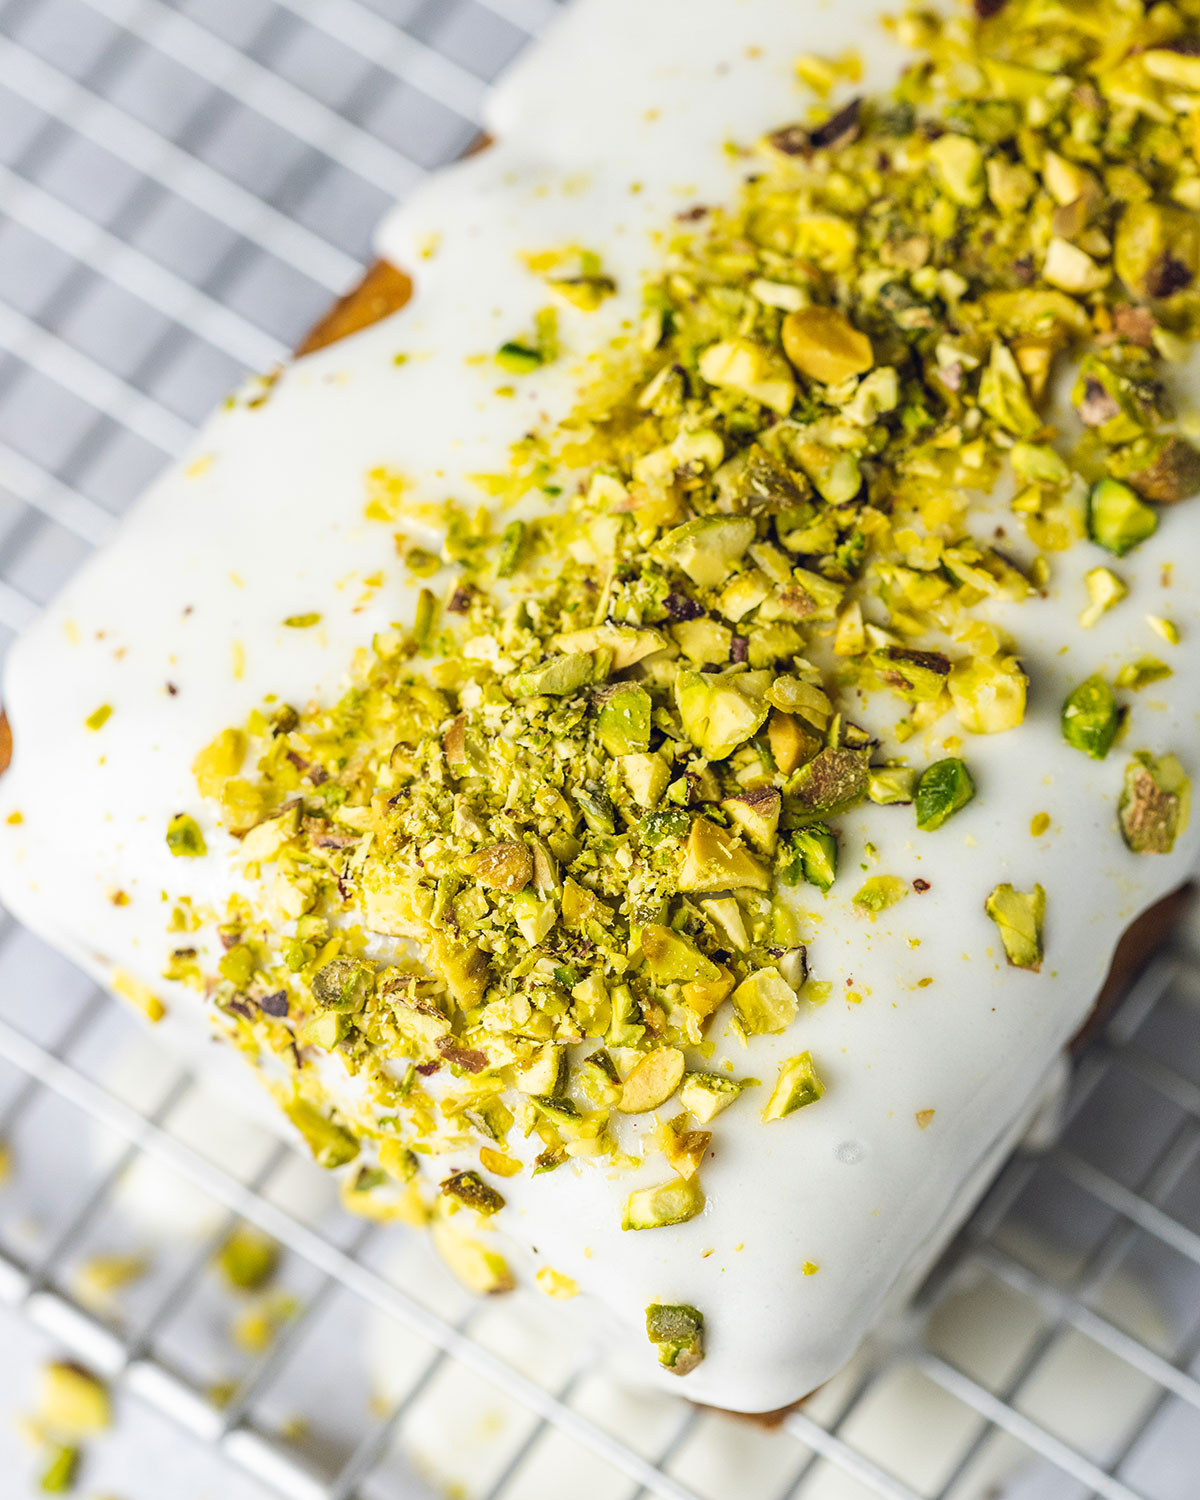 Pistachio nuts on a loaf cake